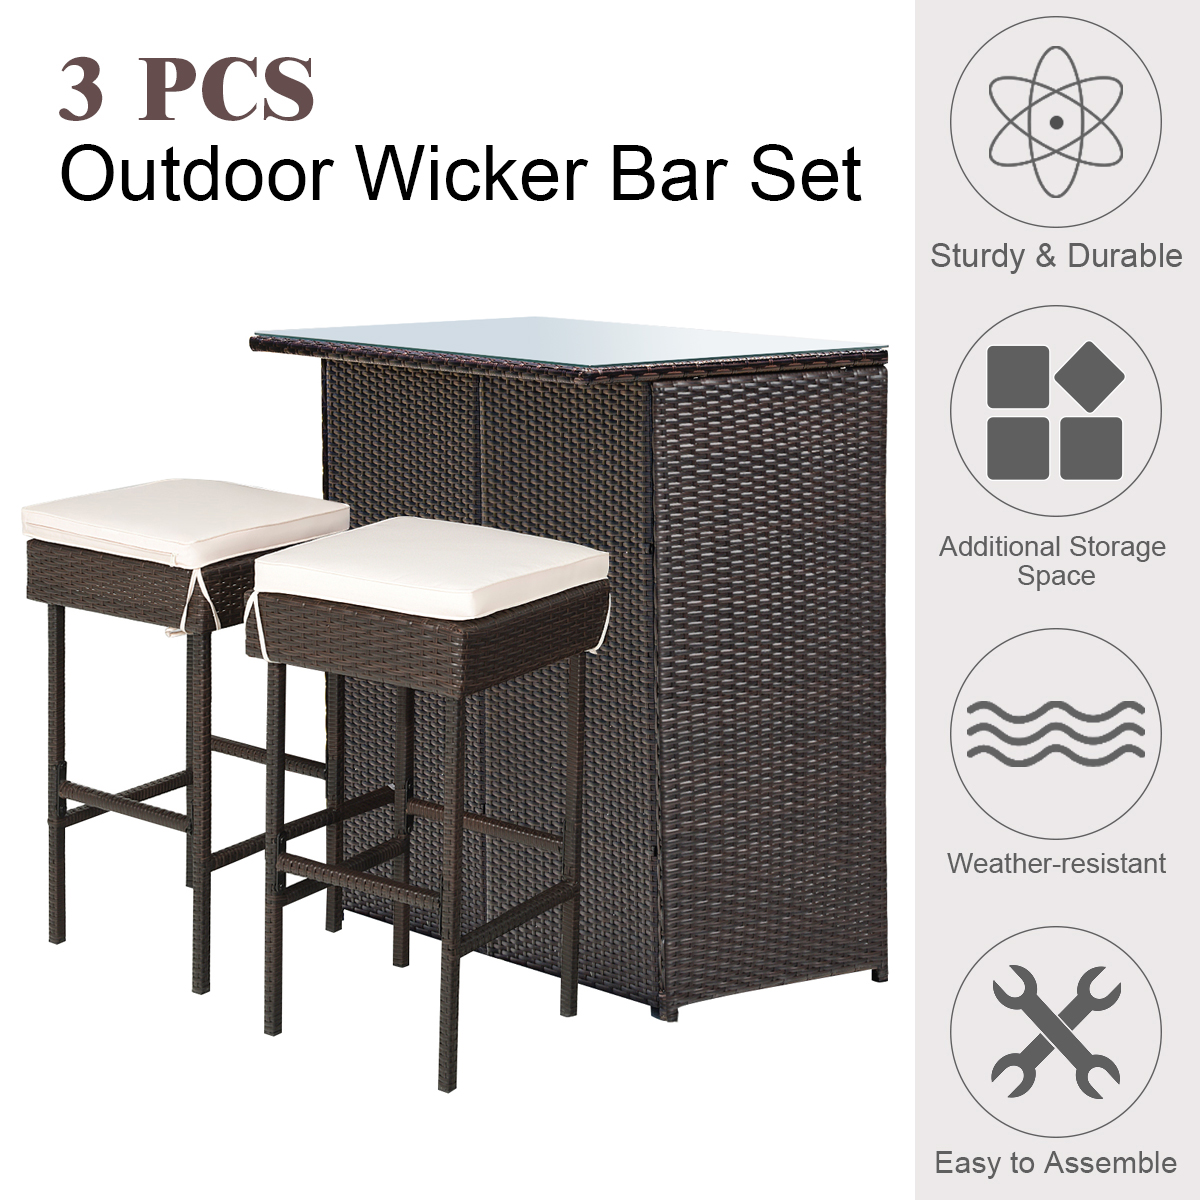 Costway 3PCS Patio Rattan Wicker Bar Table Stools Dining Set Cushioned Chairs Garden - image 5 of 10